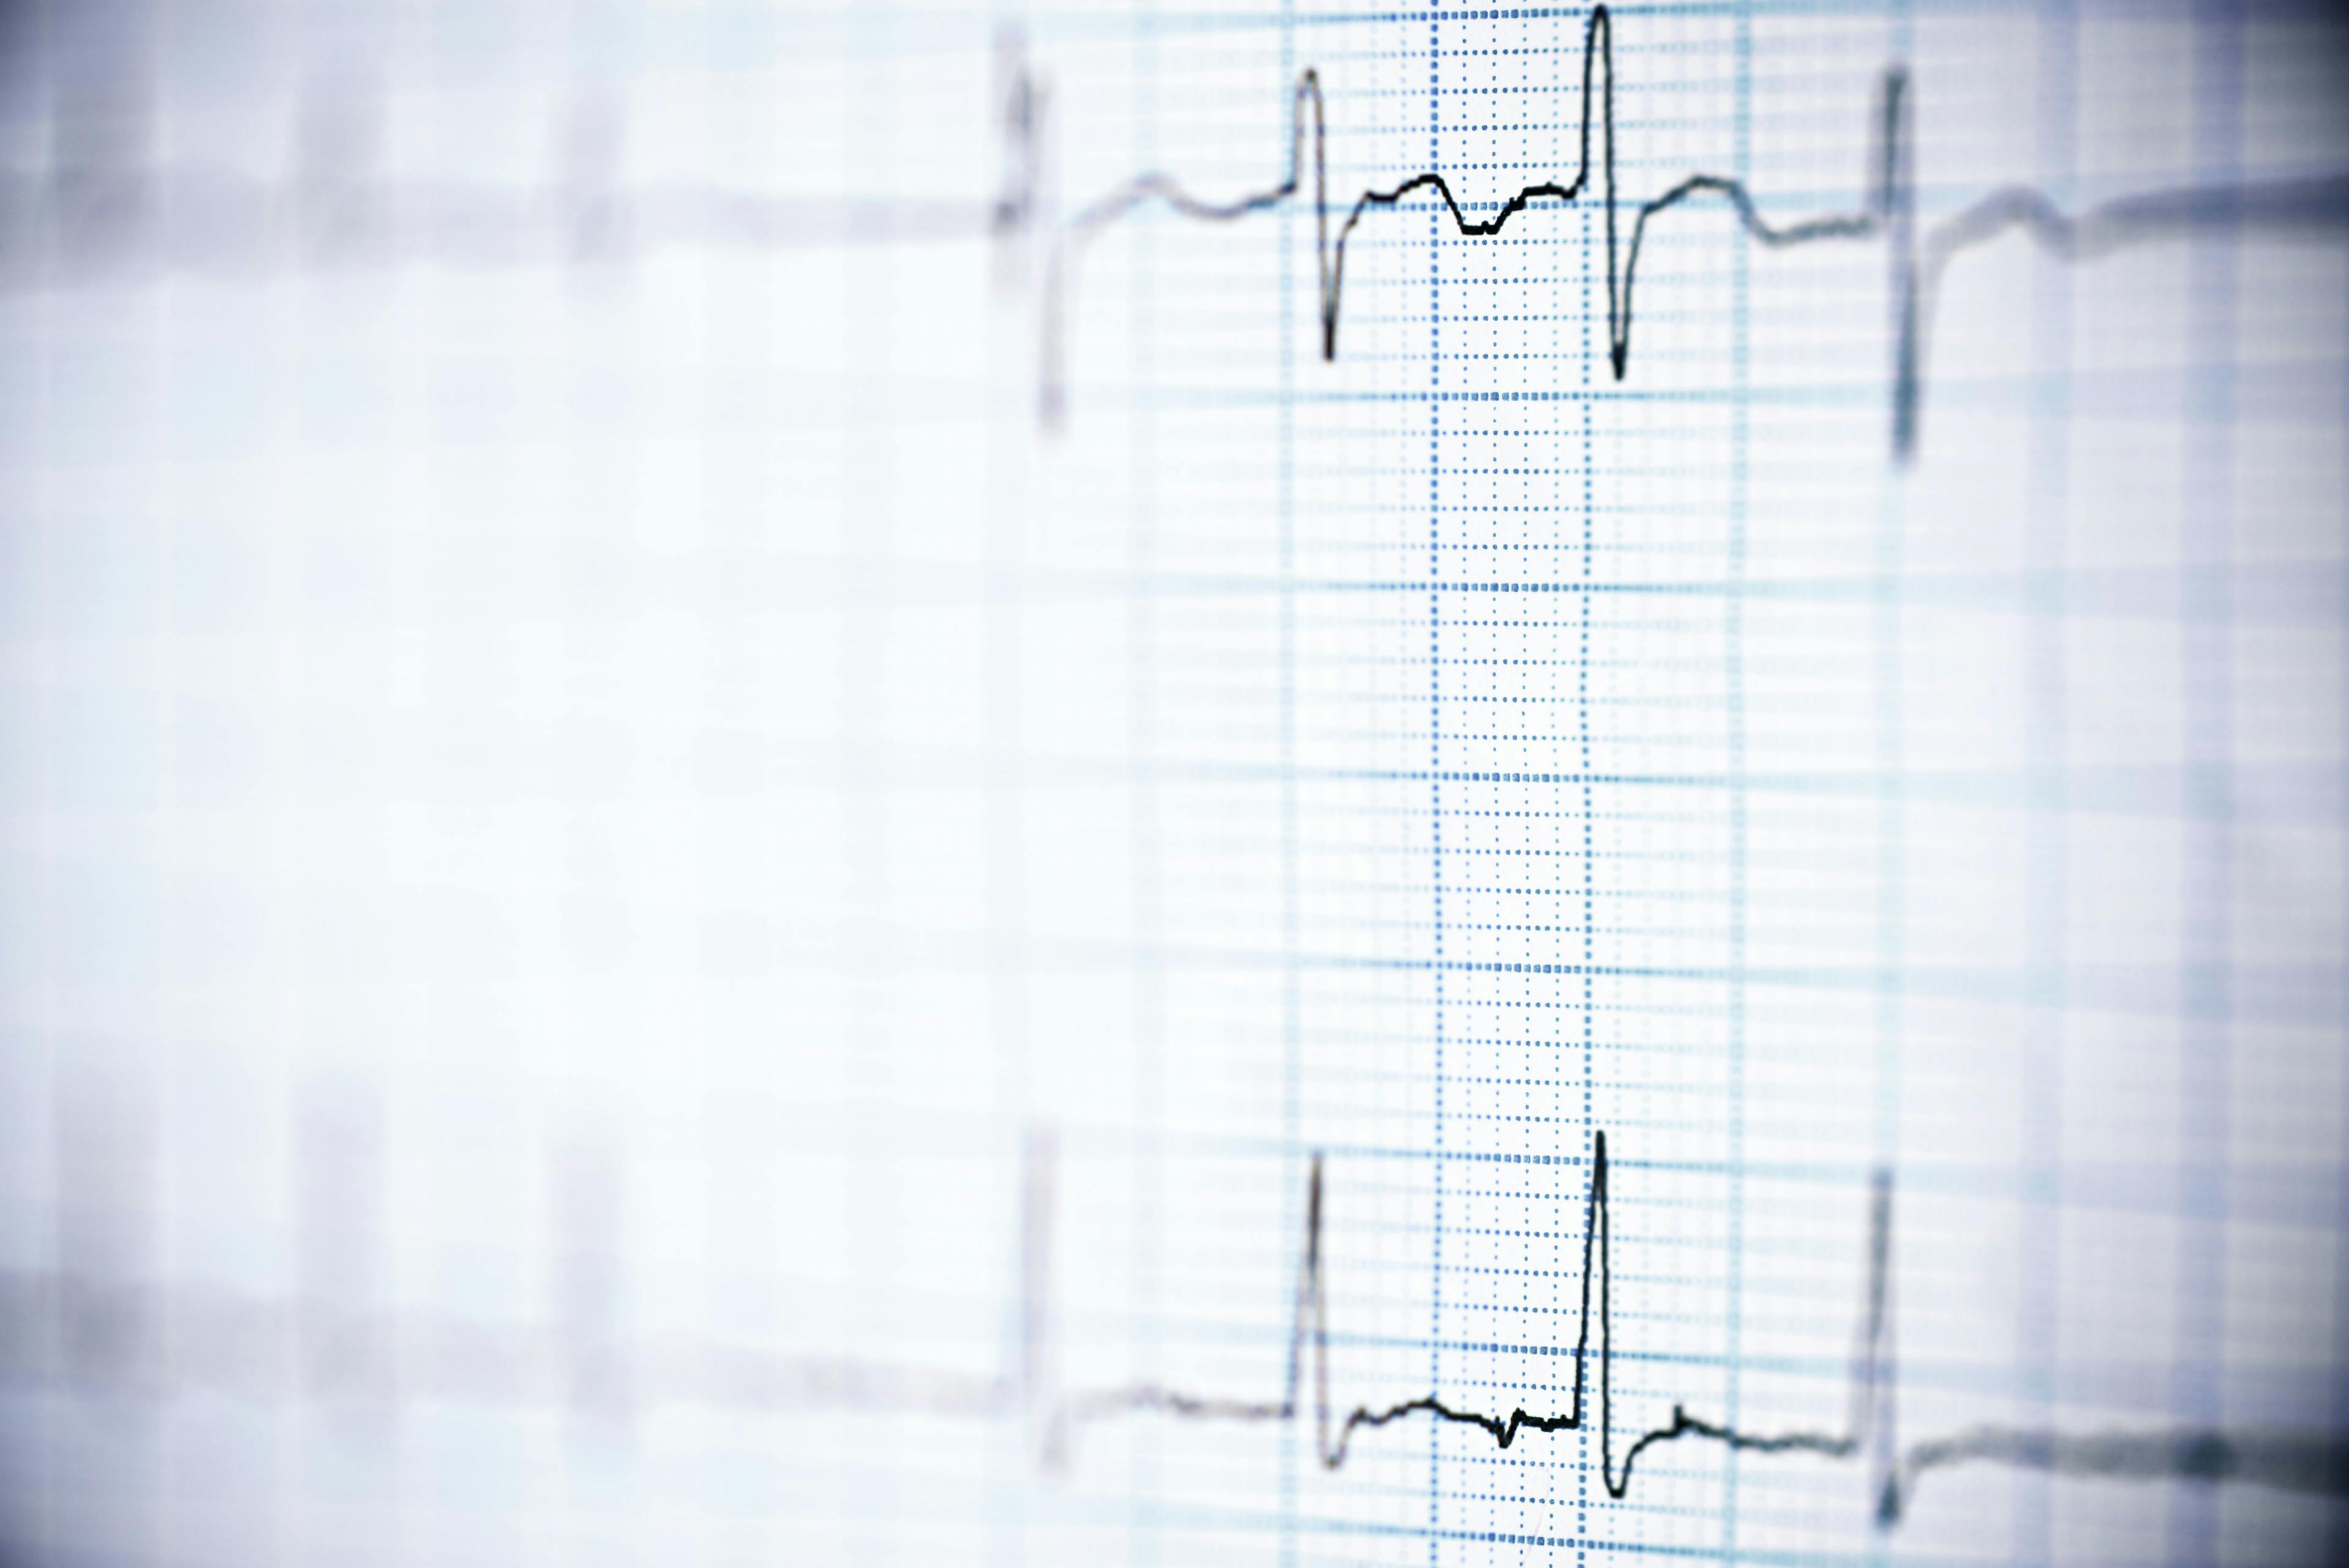 Analysis Suggests Wealthier Countries Seeing Greater Incidence of AFib Deaths